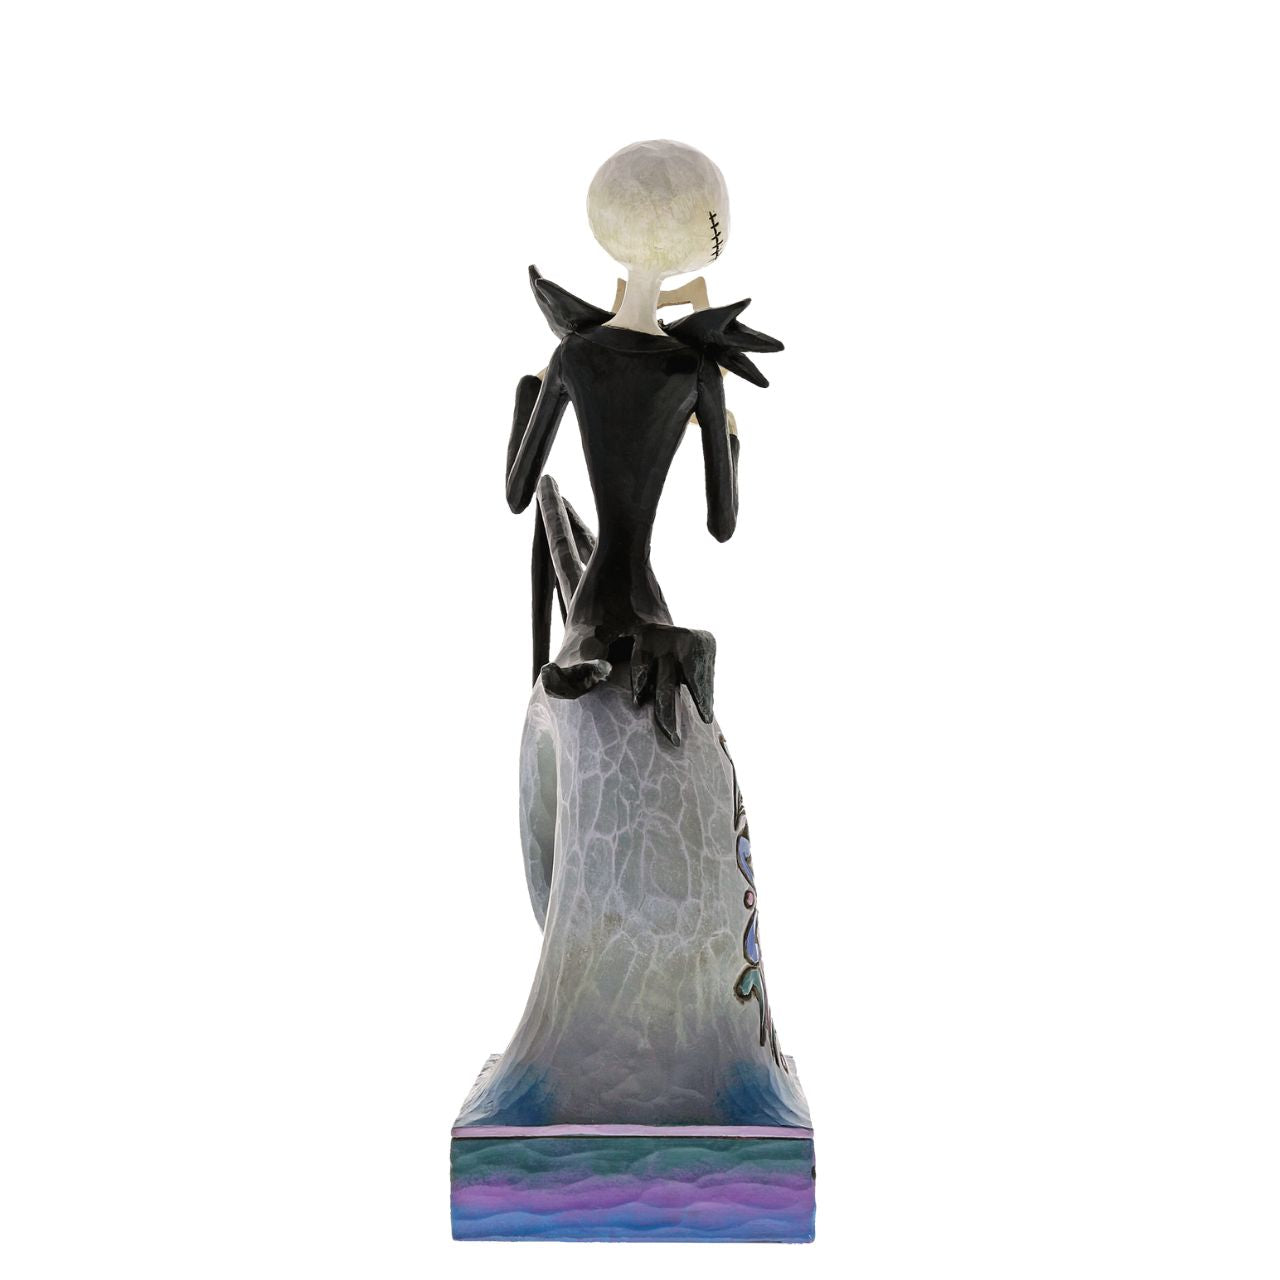 Disney Traditions by Jim Shore "What's This?" - Jack Skellington Figurine  In this captivating sculpture, Jim Shore features the King of Pumpkin Town discovering just how fun Christmas can be| In this Nightmare Before Christmas figurine you can almost hear Jack Skellington singing as he uncovers the delight of the holiday.